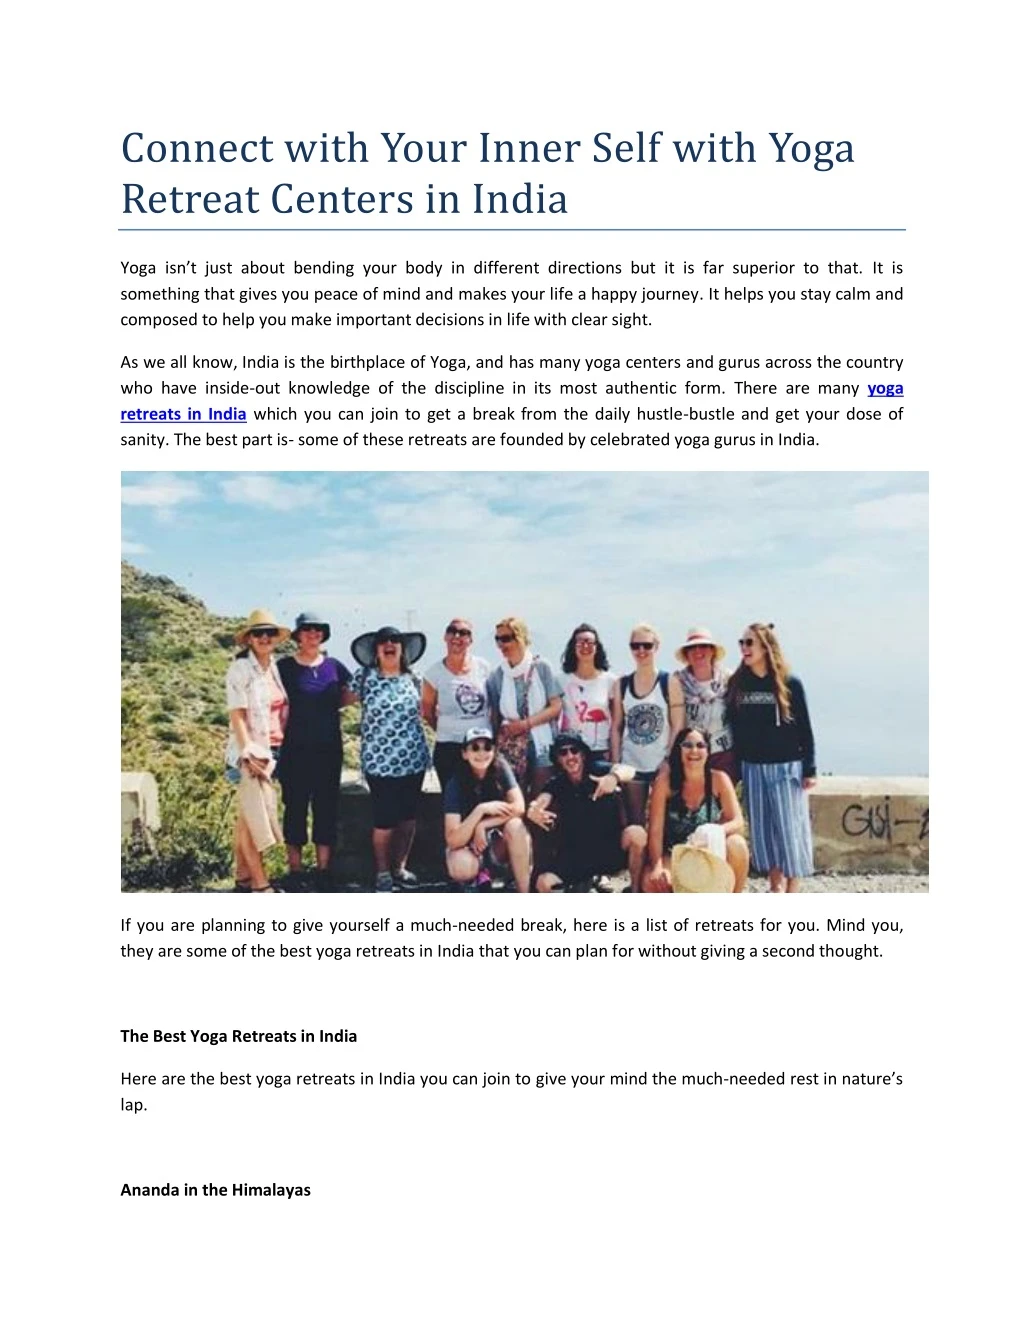 connect with your inner self with yoga retreat